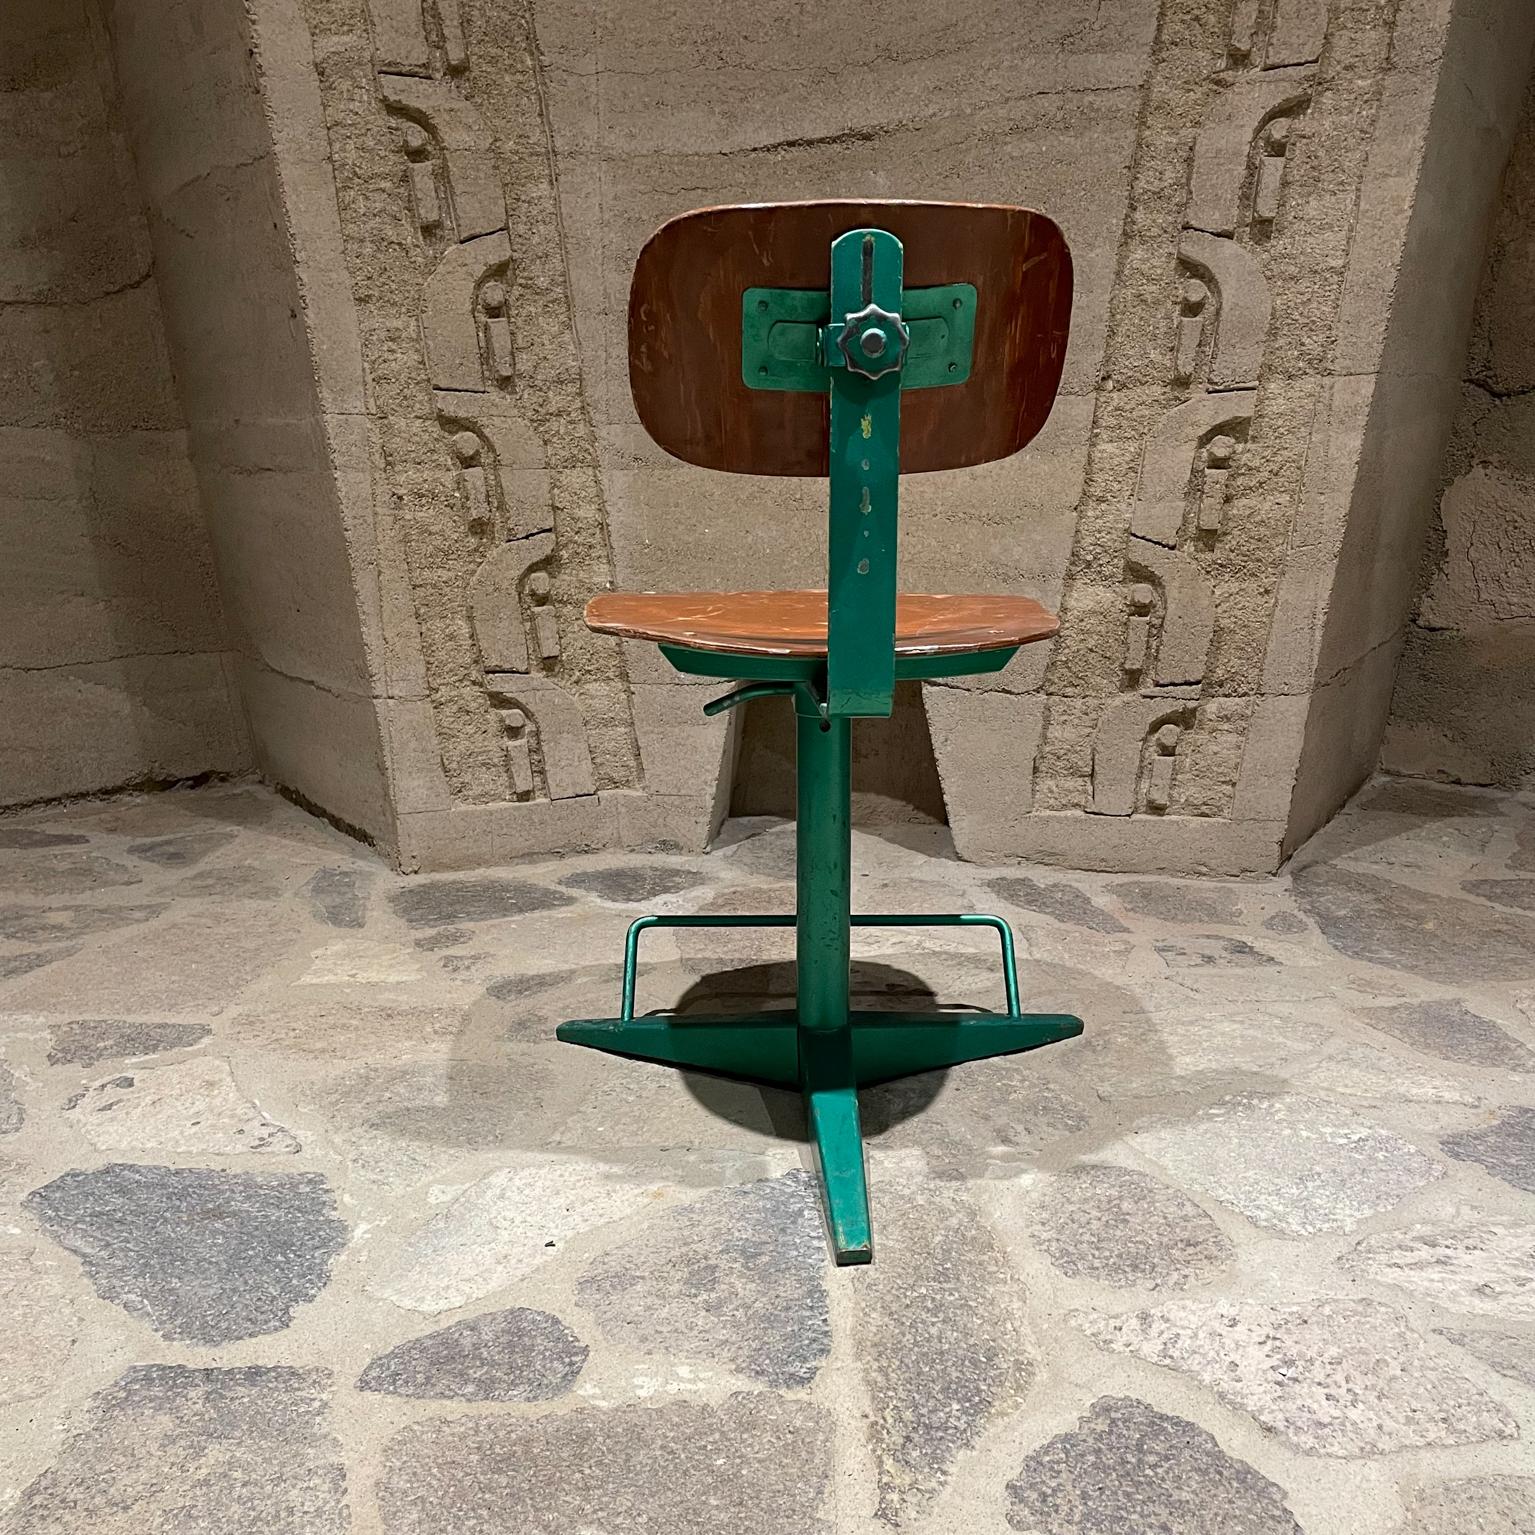 Fab French Prouve 1950s Style Green Office Chair Plywood Tripod Base + Footrest In Good Condition For Sale In Chula Vista, CA